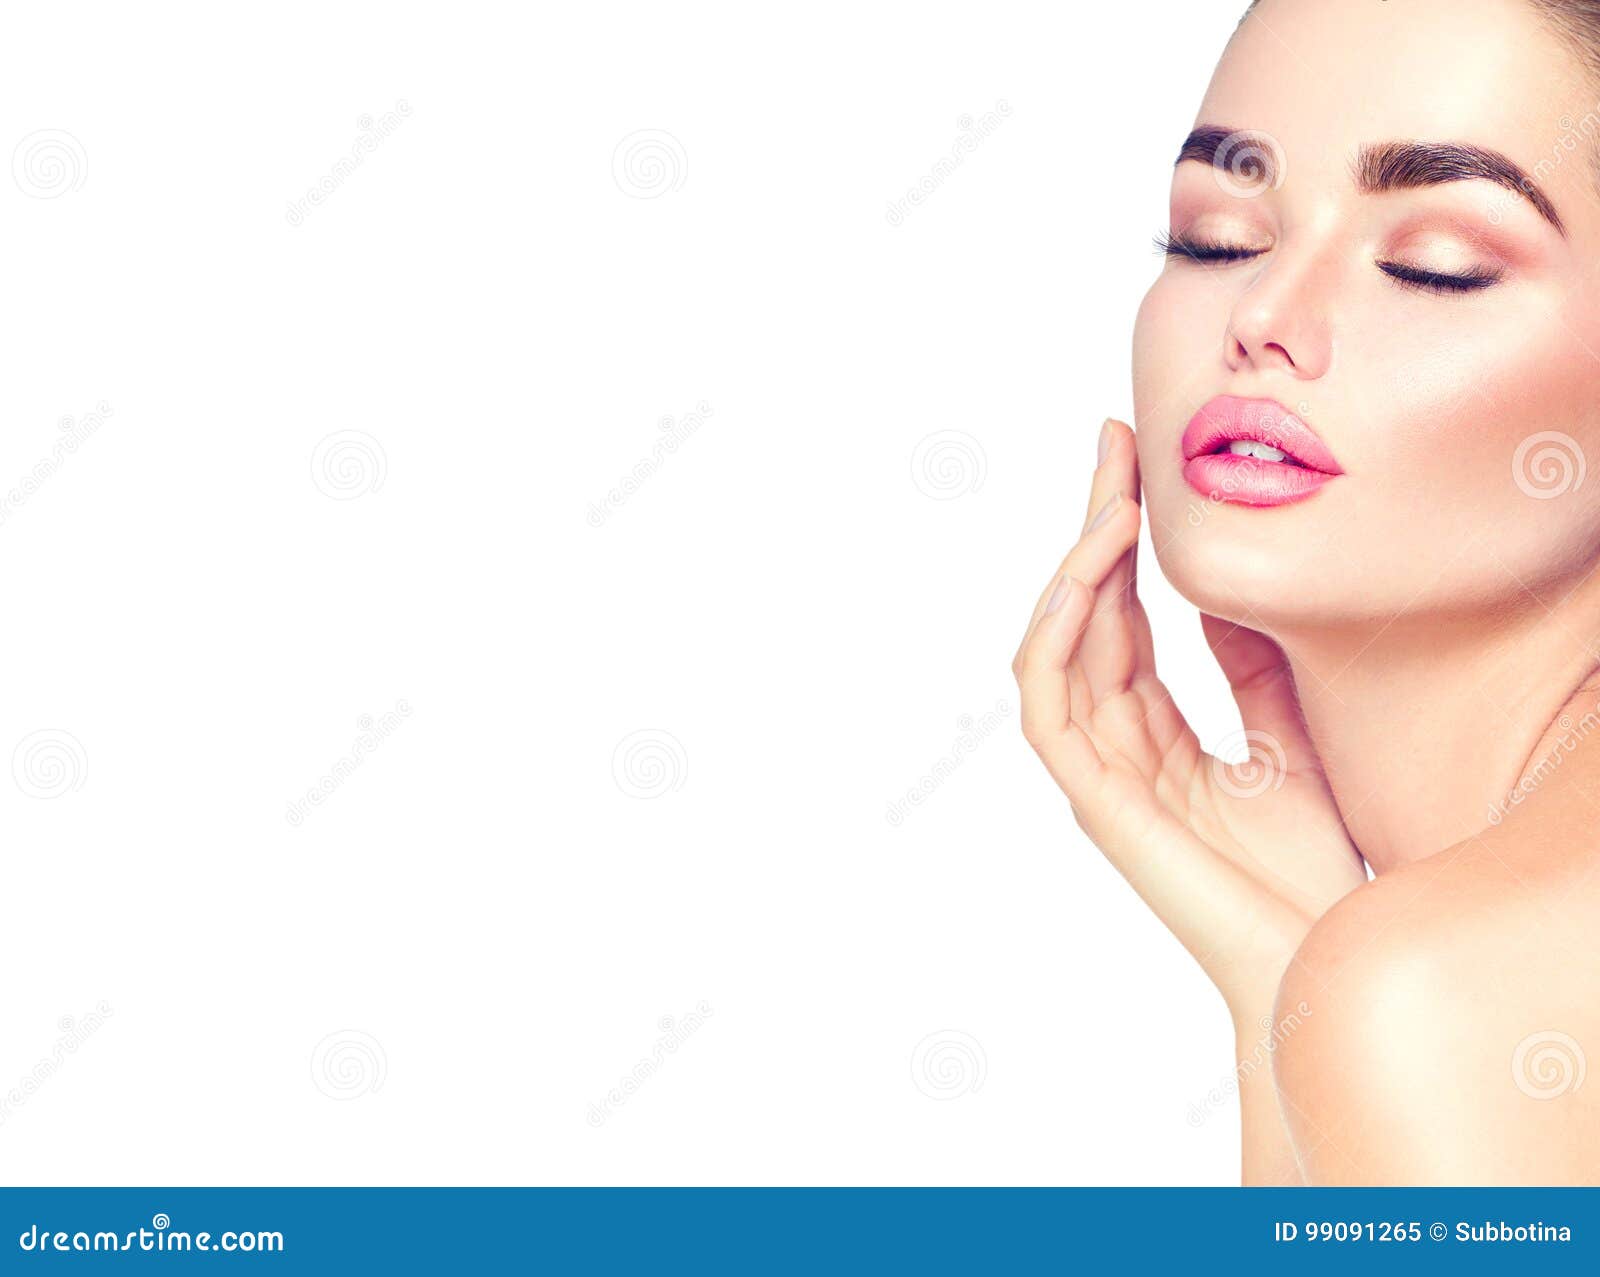 beauty spa brunette woman touching her face. skincare